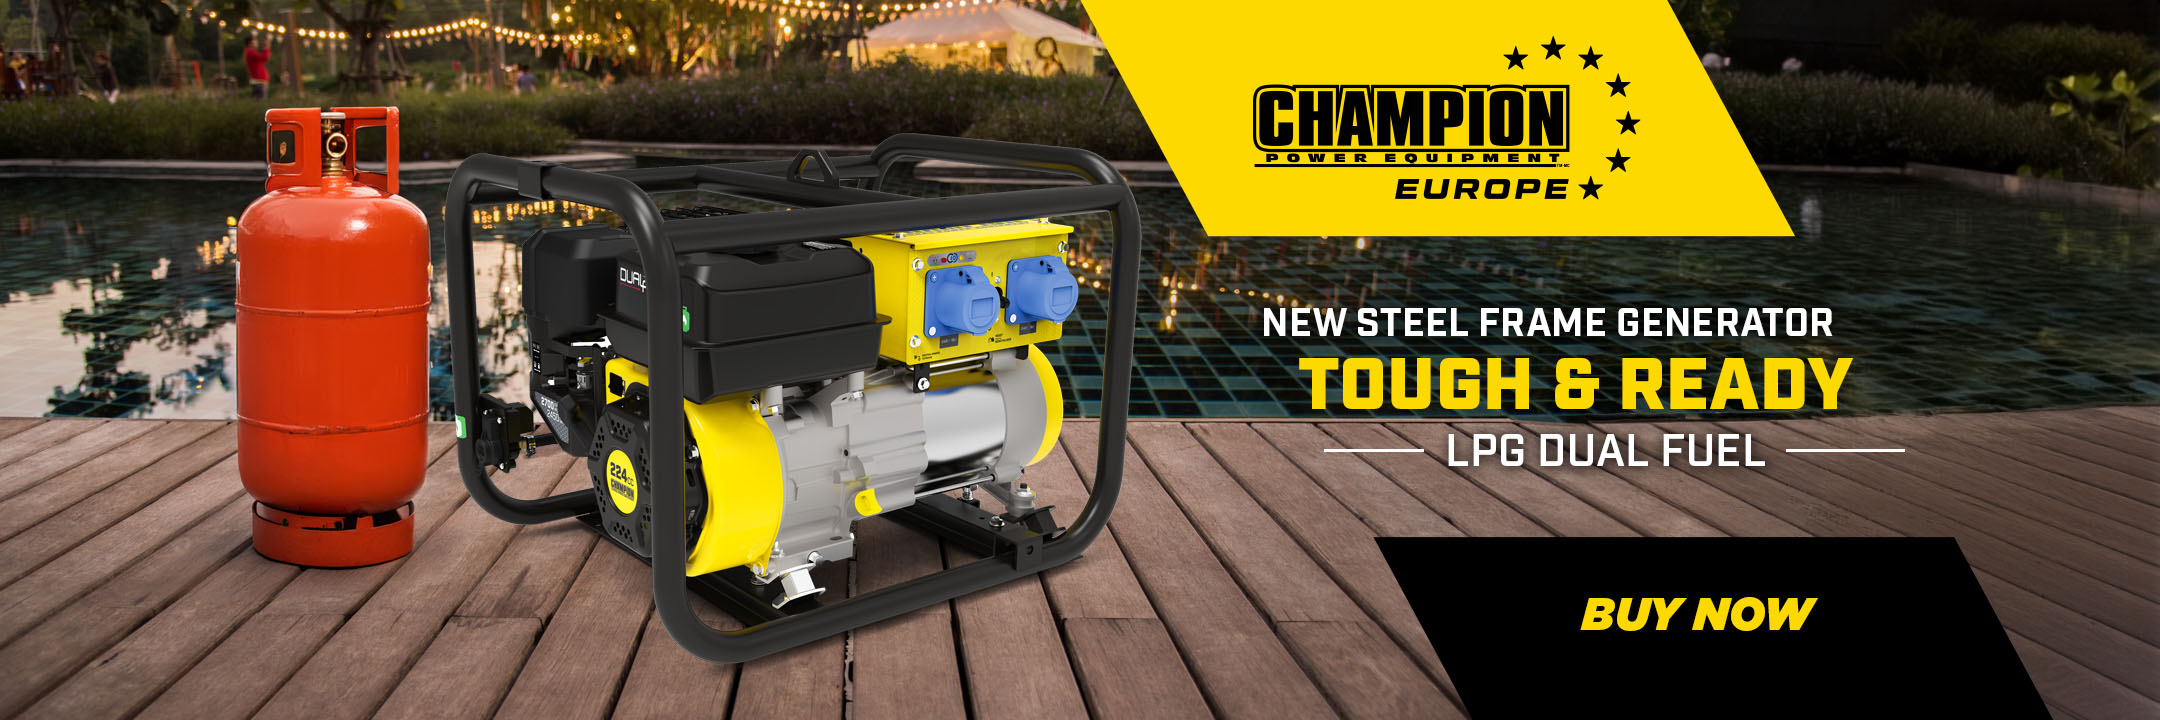 New Steel Frame Tough and Ready Generator